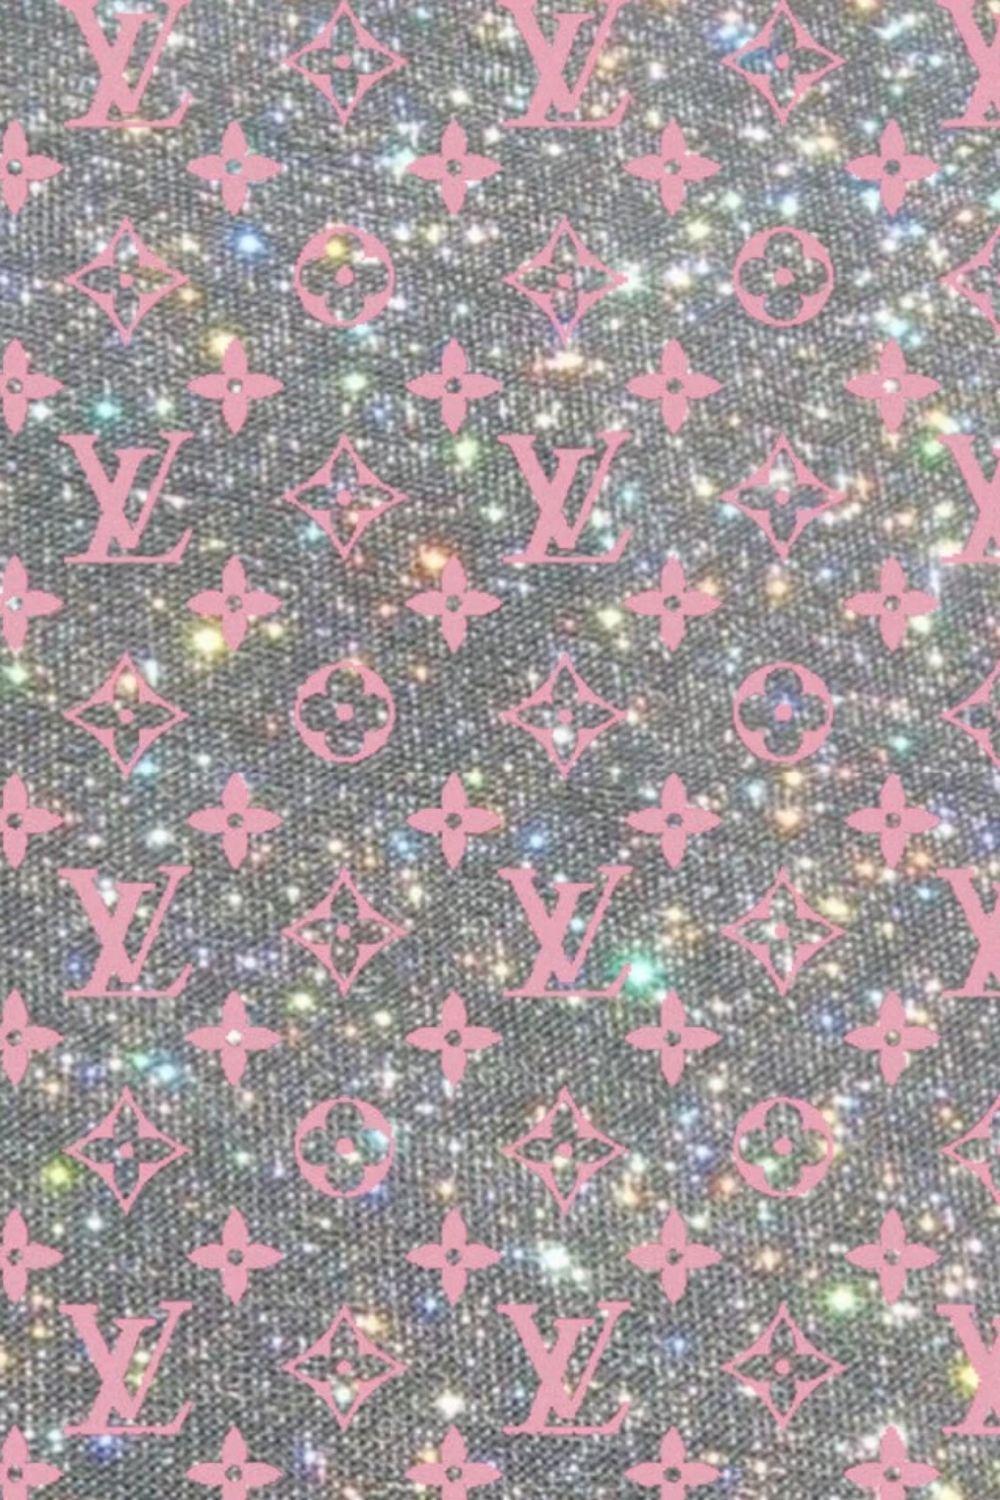 LV Glitter wallpaper by ChillVibes1652 - Download on ZEDGE™